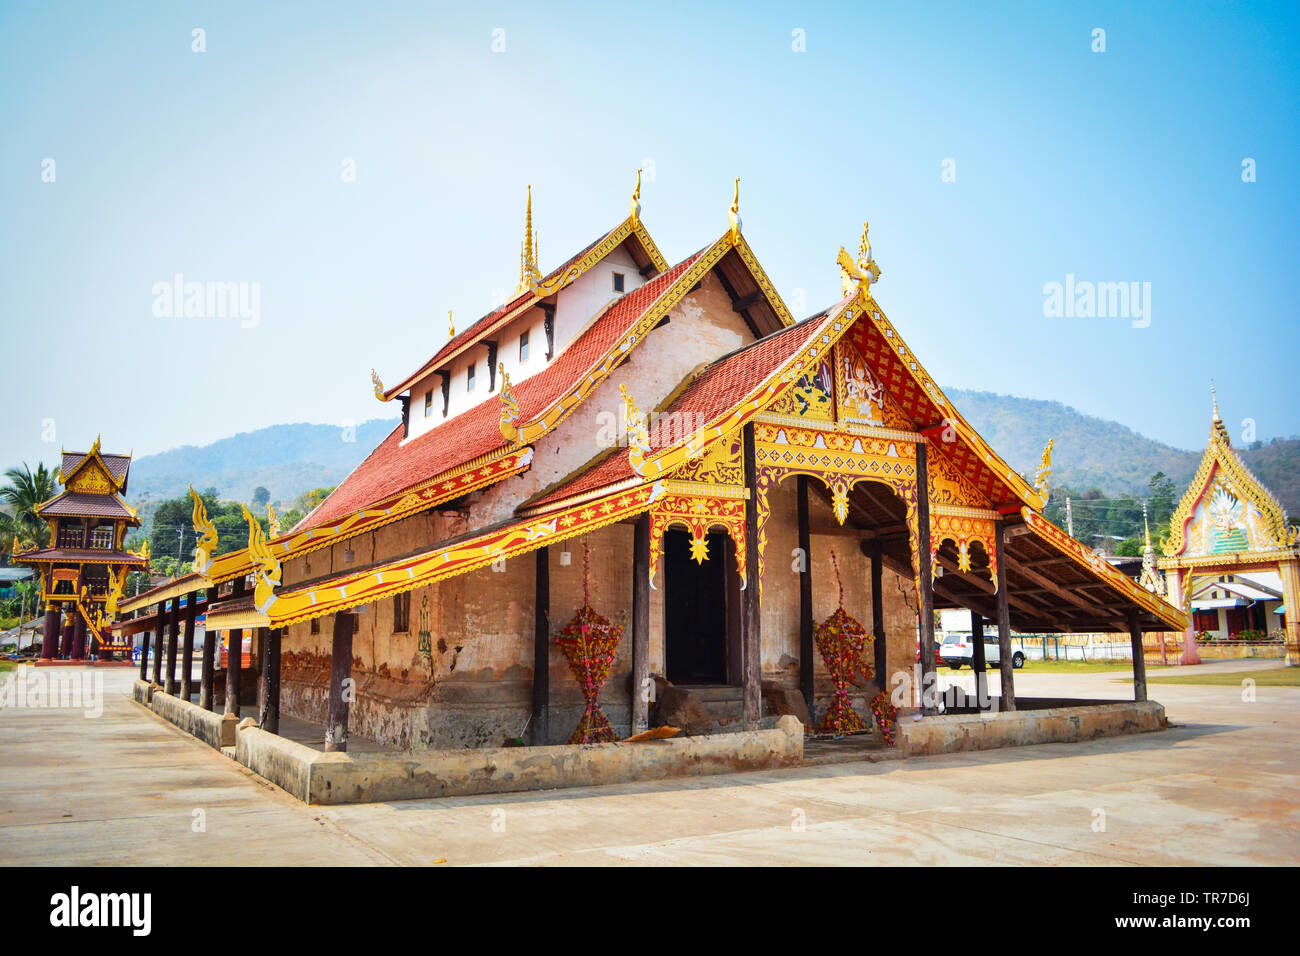 Old temple in Thailand / The story ancient temple of is over 400 years old landmark of buddhist - Wat Sri Pho Chai at Na Haeo Loei Thailand - naheaw Stock Photo